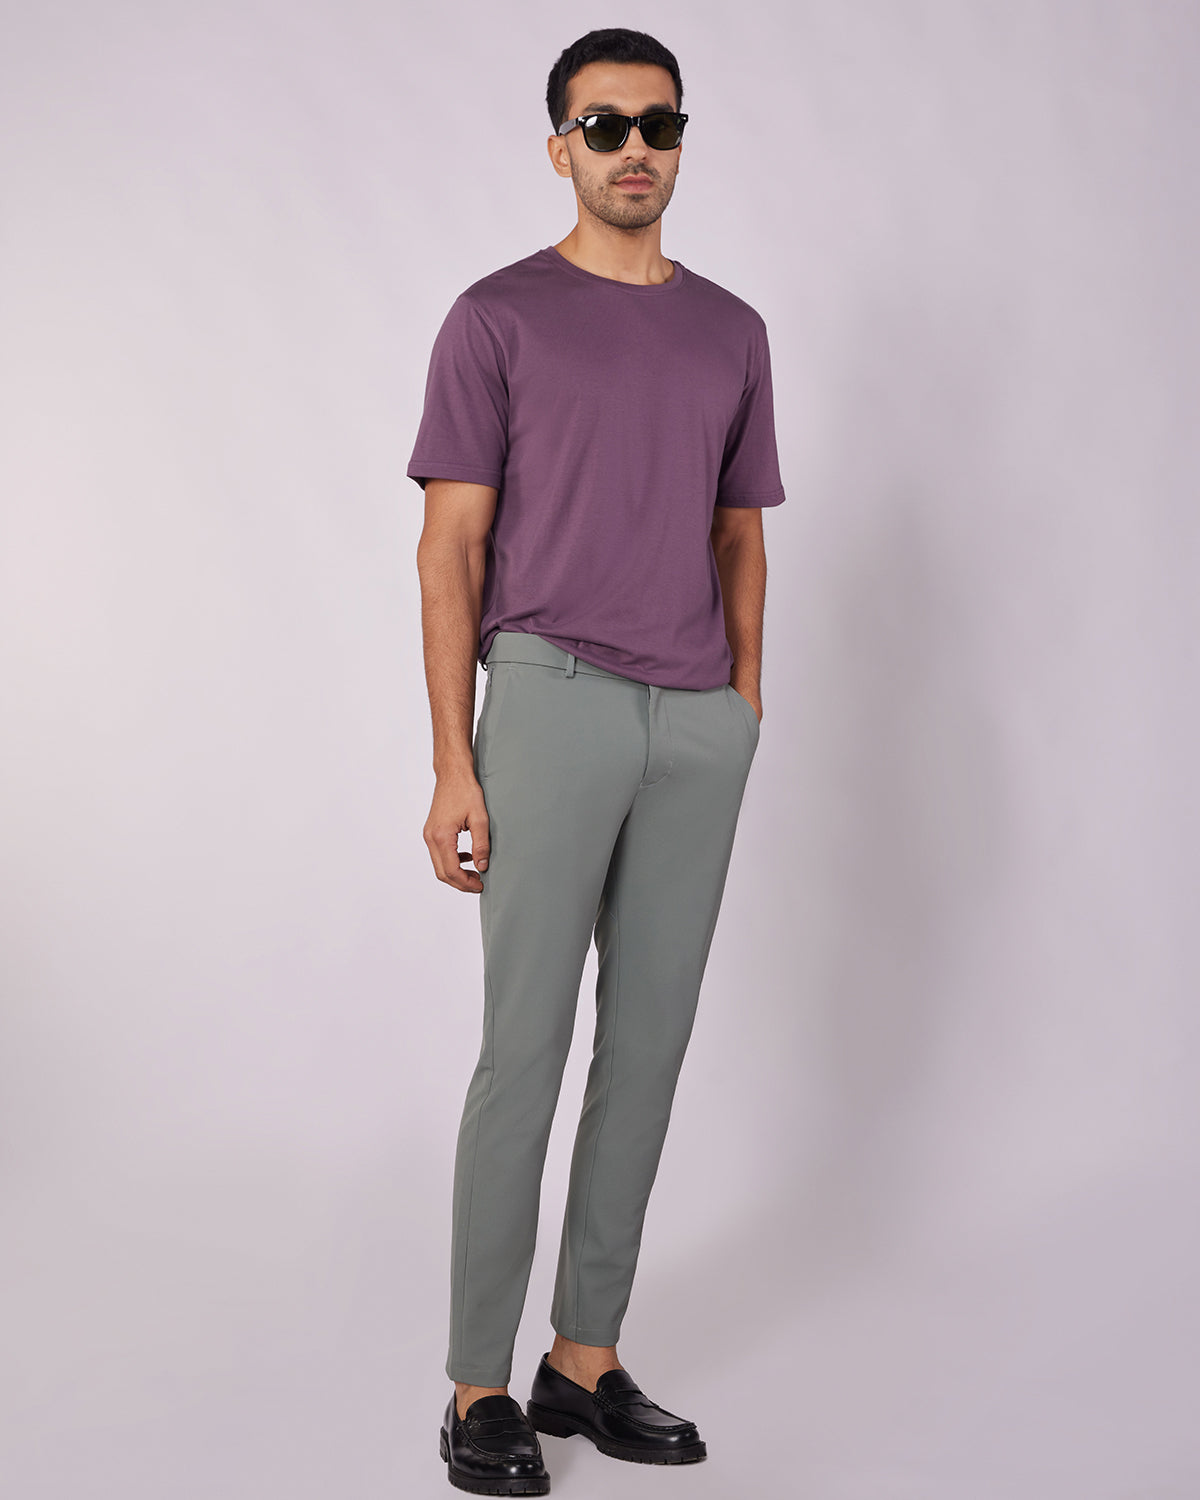 How to Wear Mint Pants for Men ? 30 Outfit Ideas | Mint pants outfit, Mint green  pants outfit, Stylish men casual